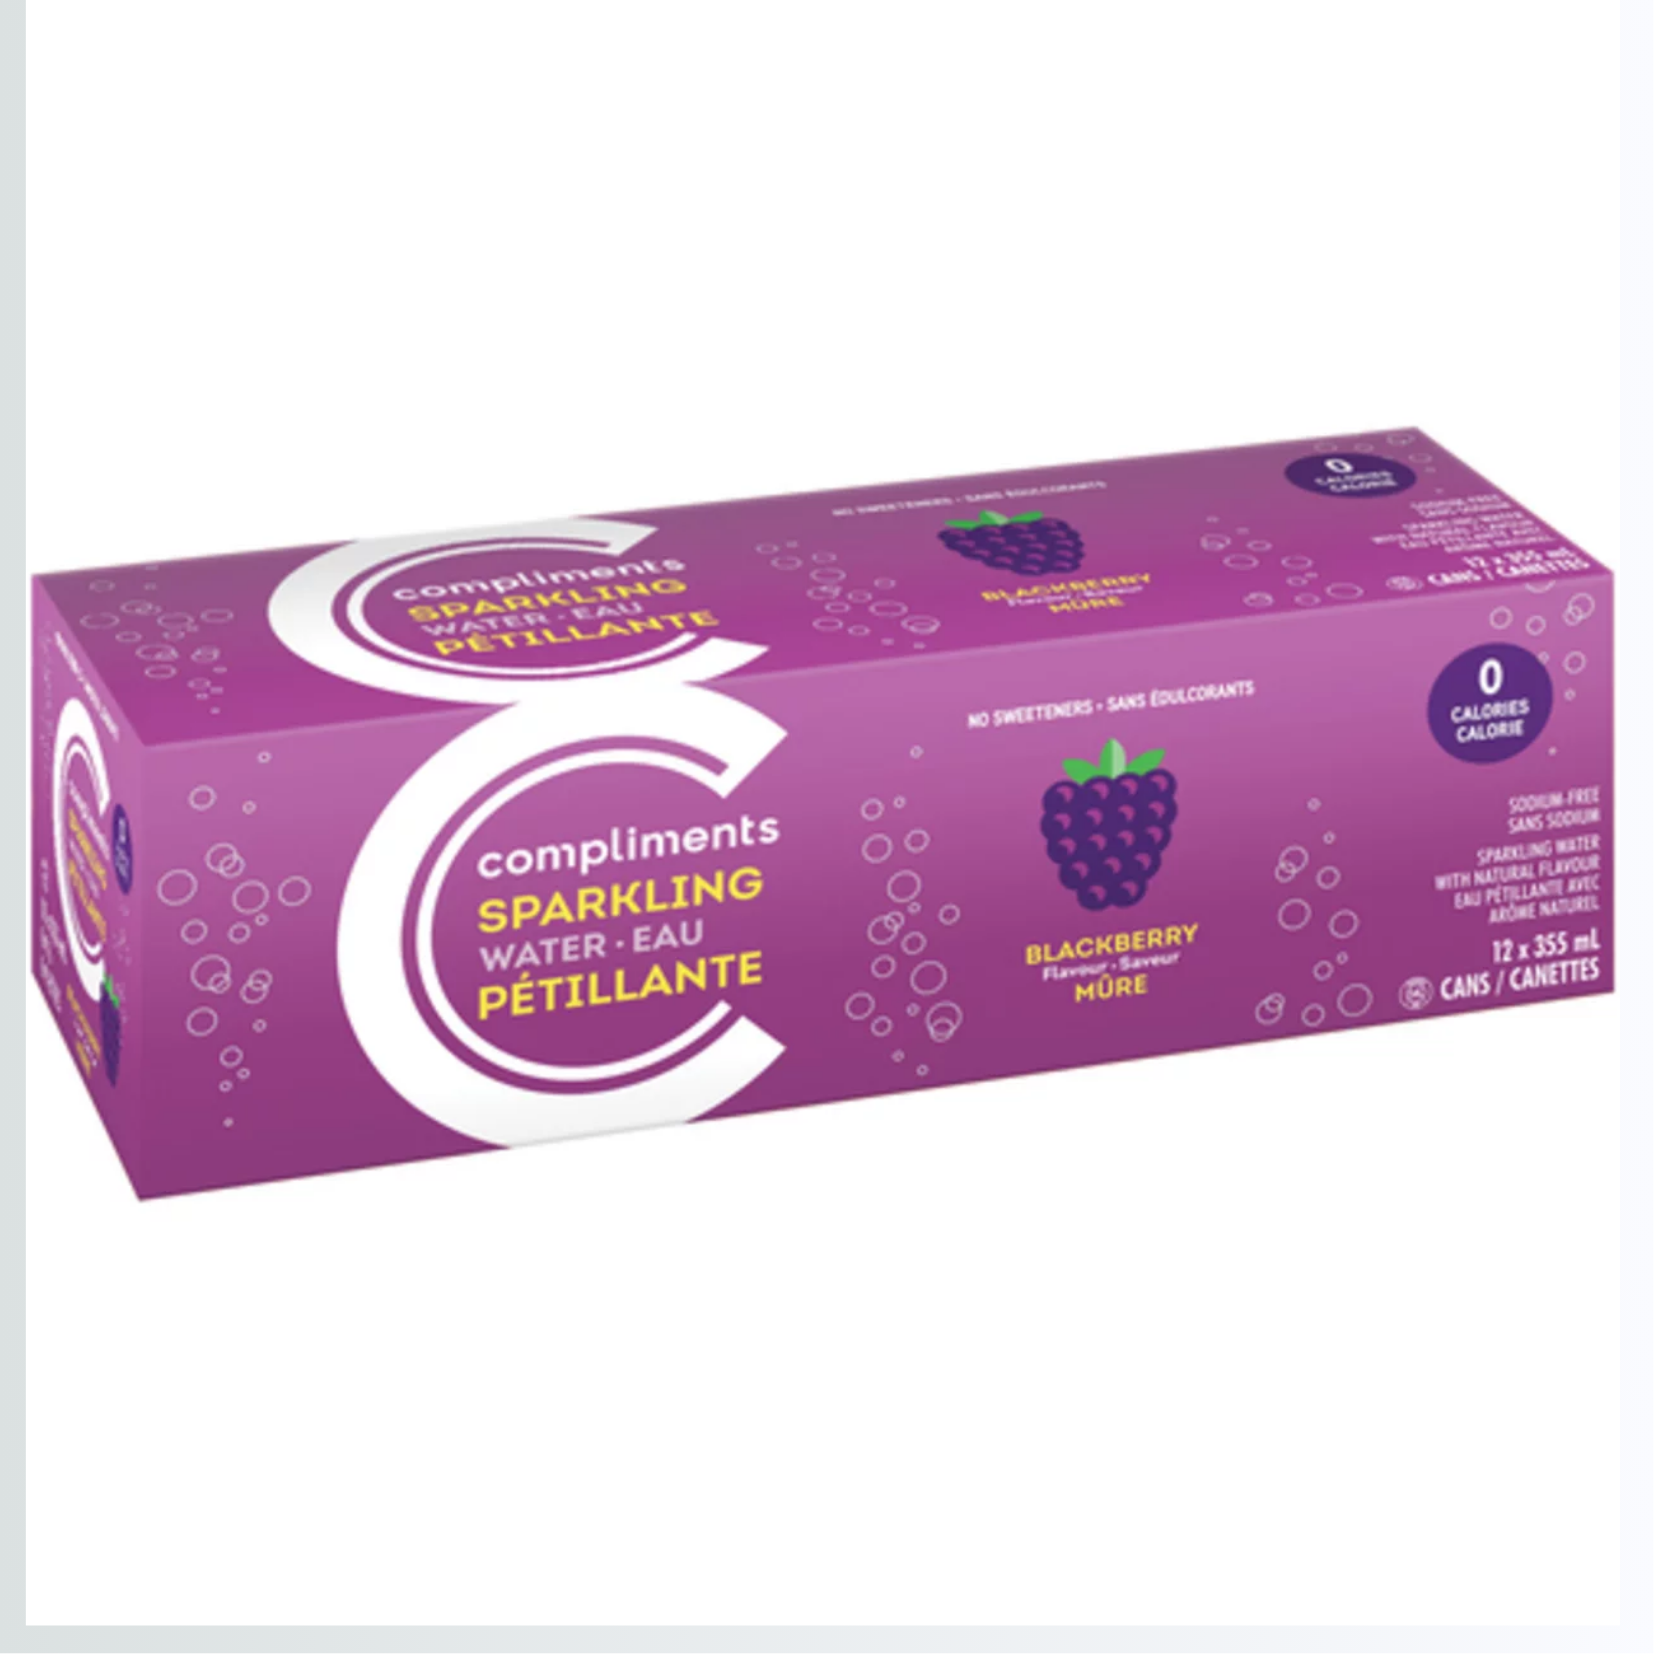 Compliments Blackberry Sparkling Water 355ml x 12